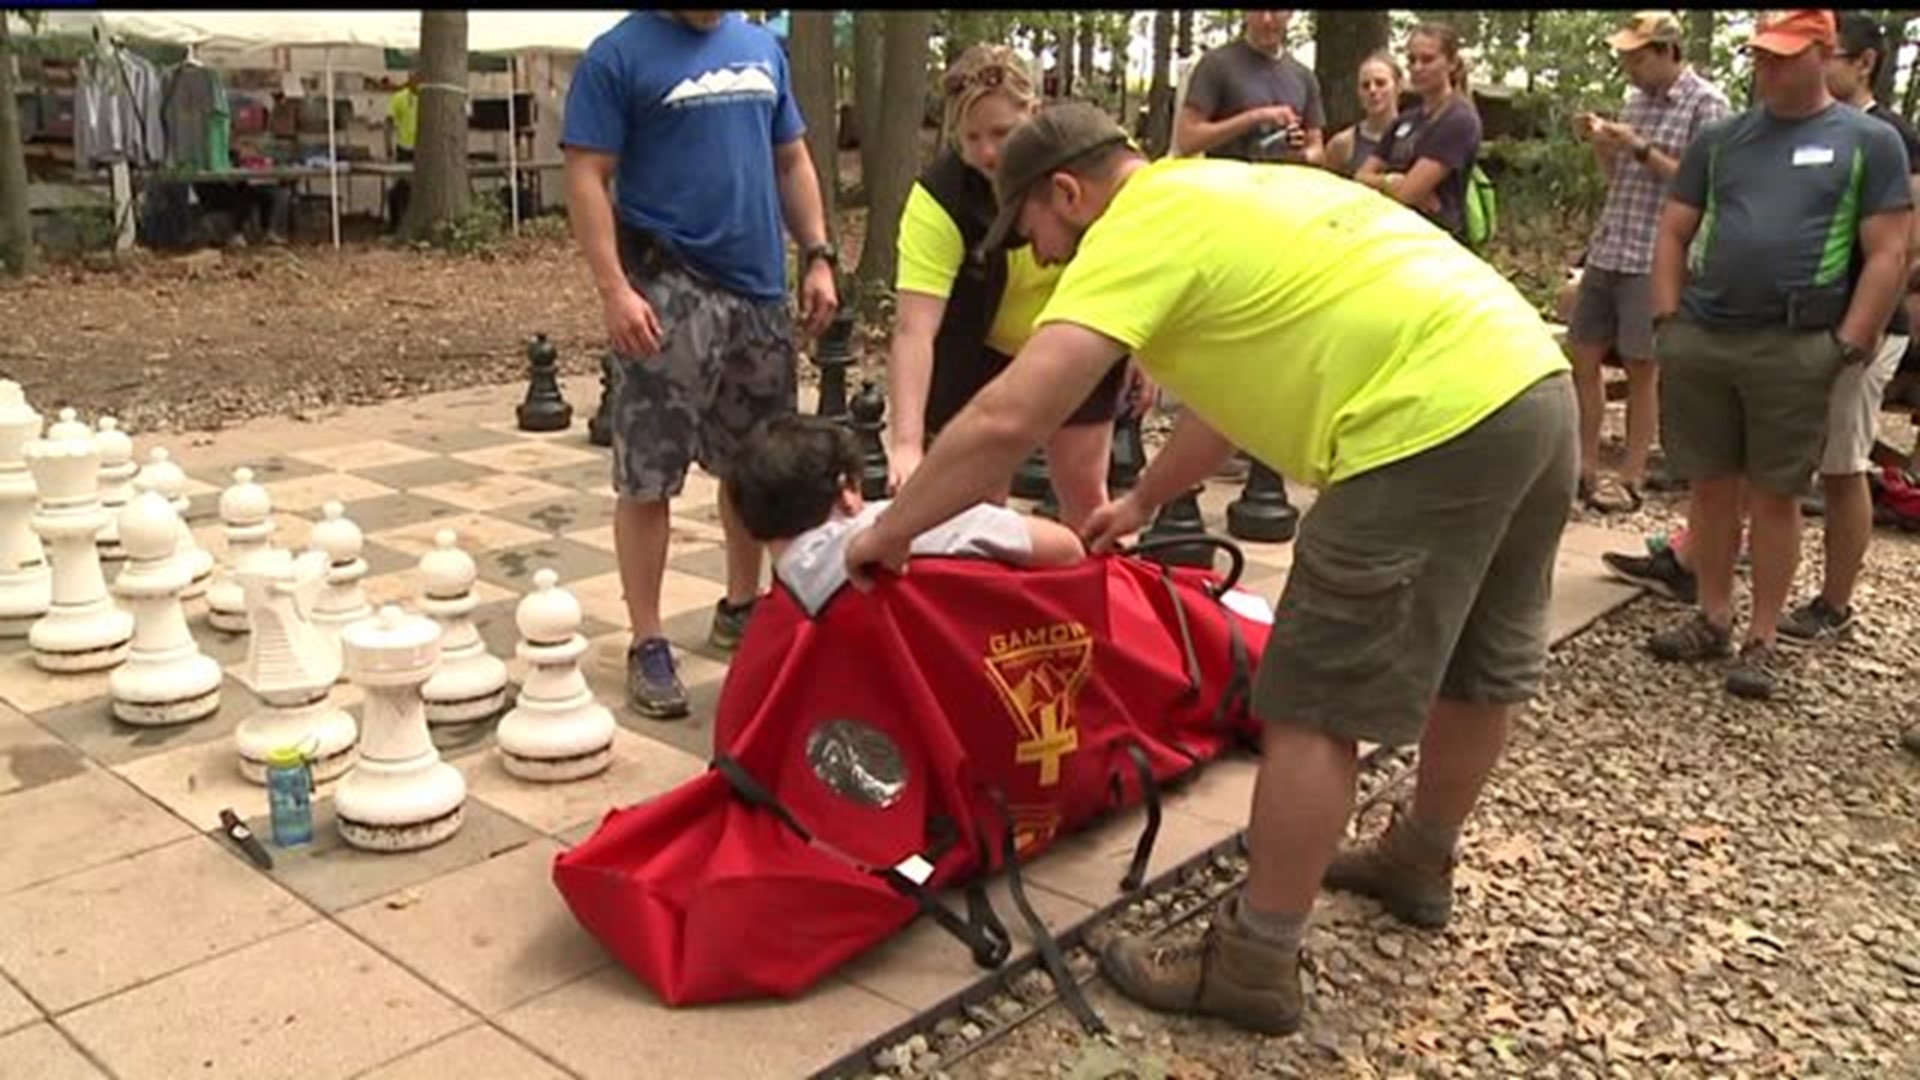 Mass casualty incident simulation held in in York County